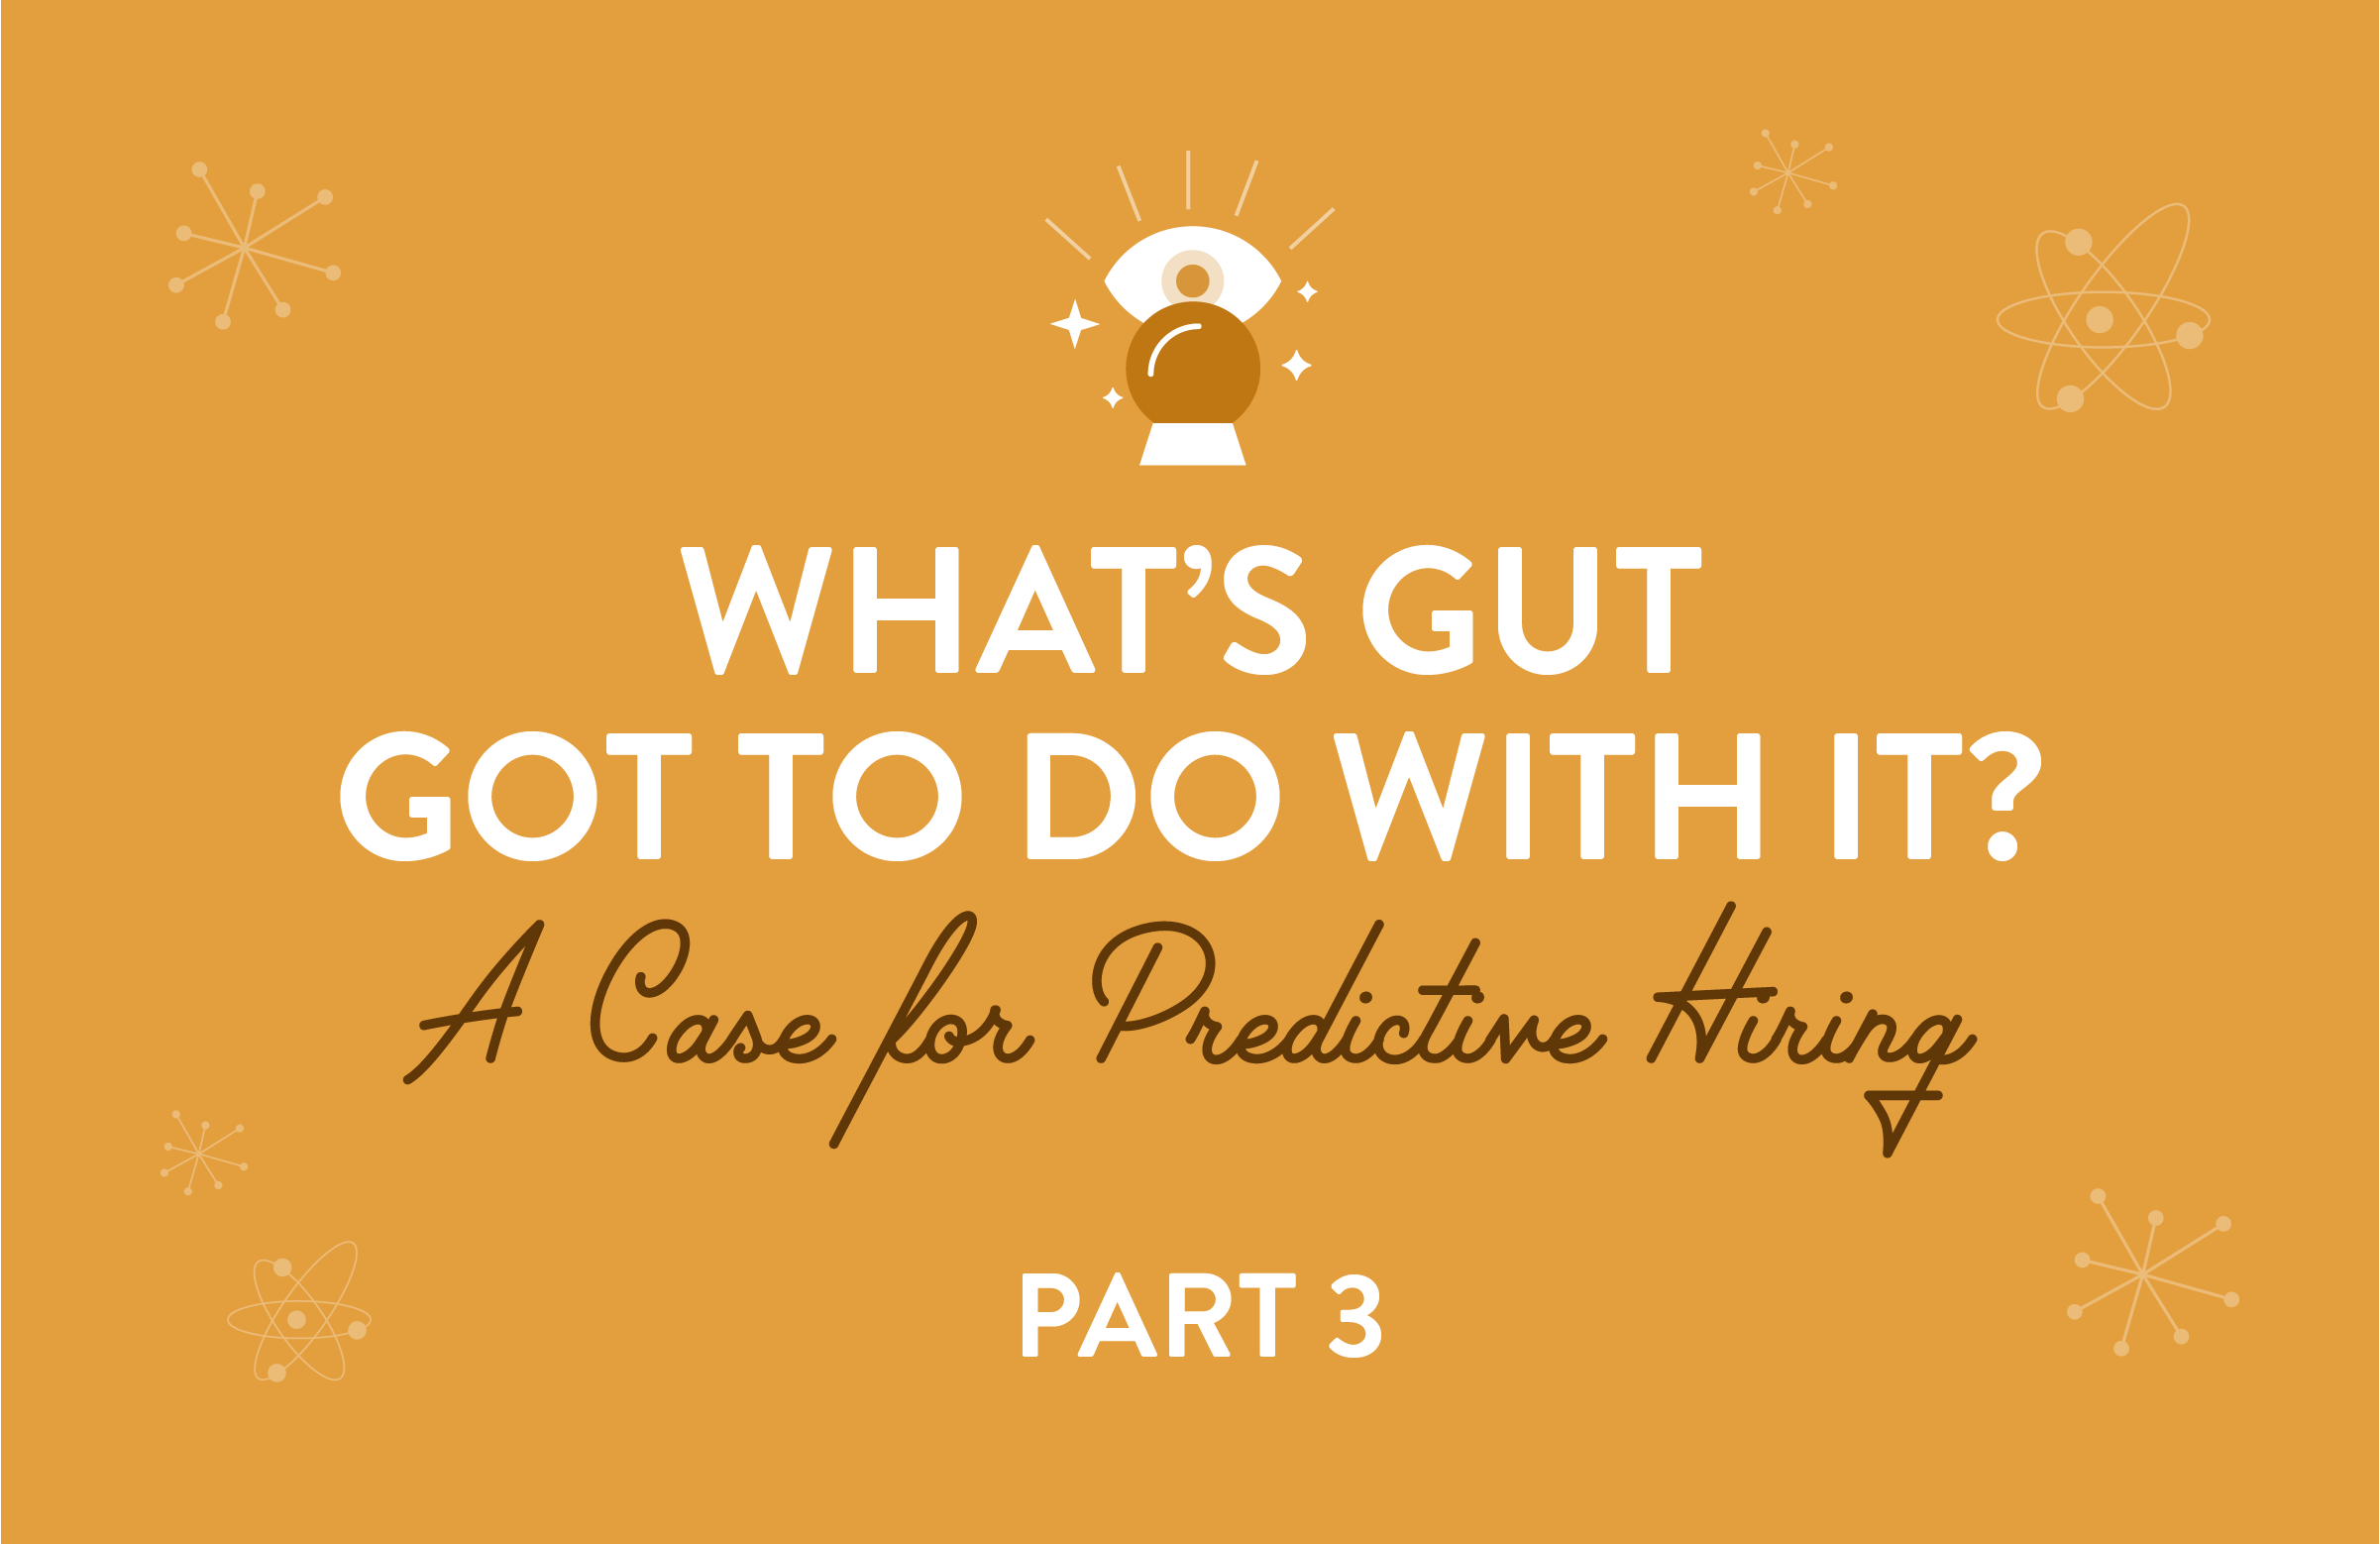 What's Gut Got to Do With It? A Case for Predictive Hiring